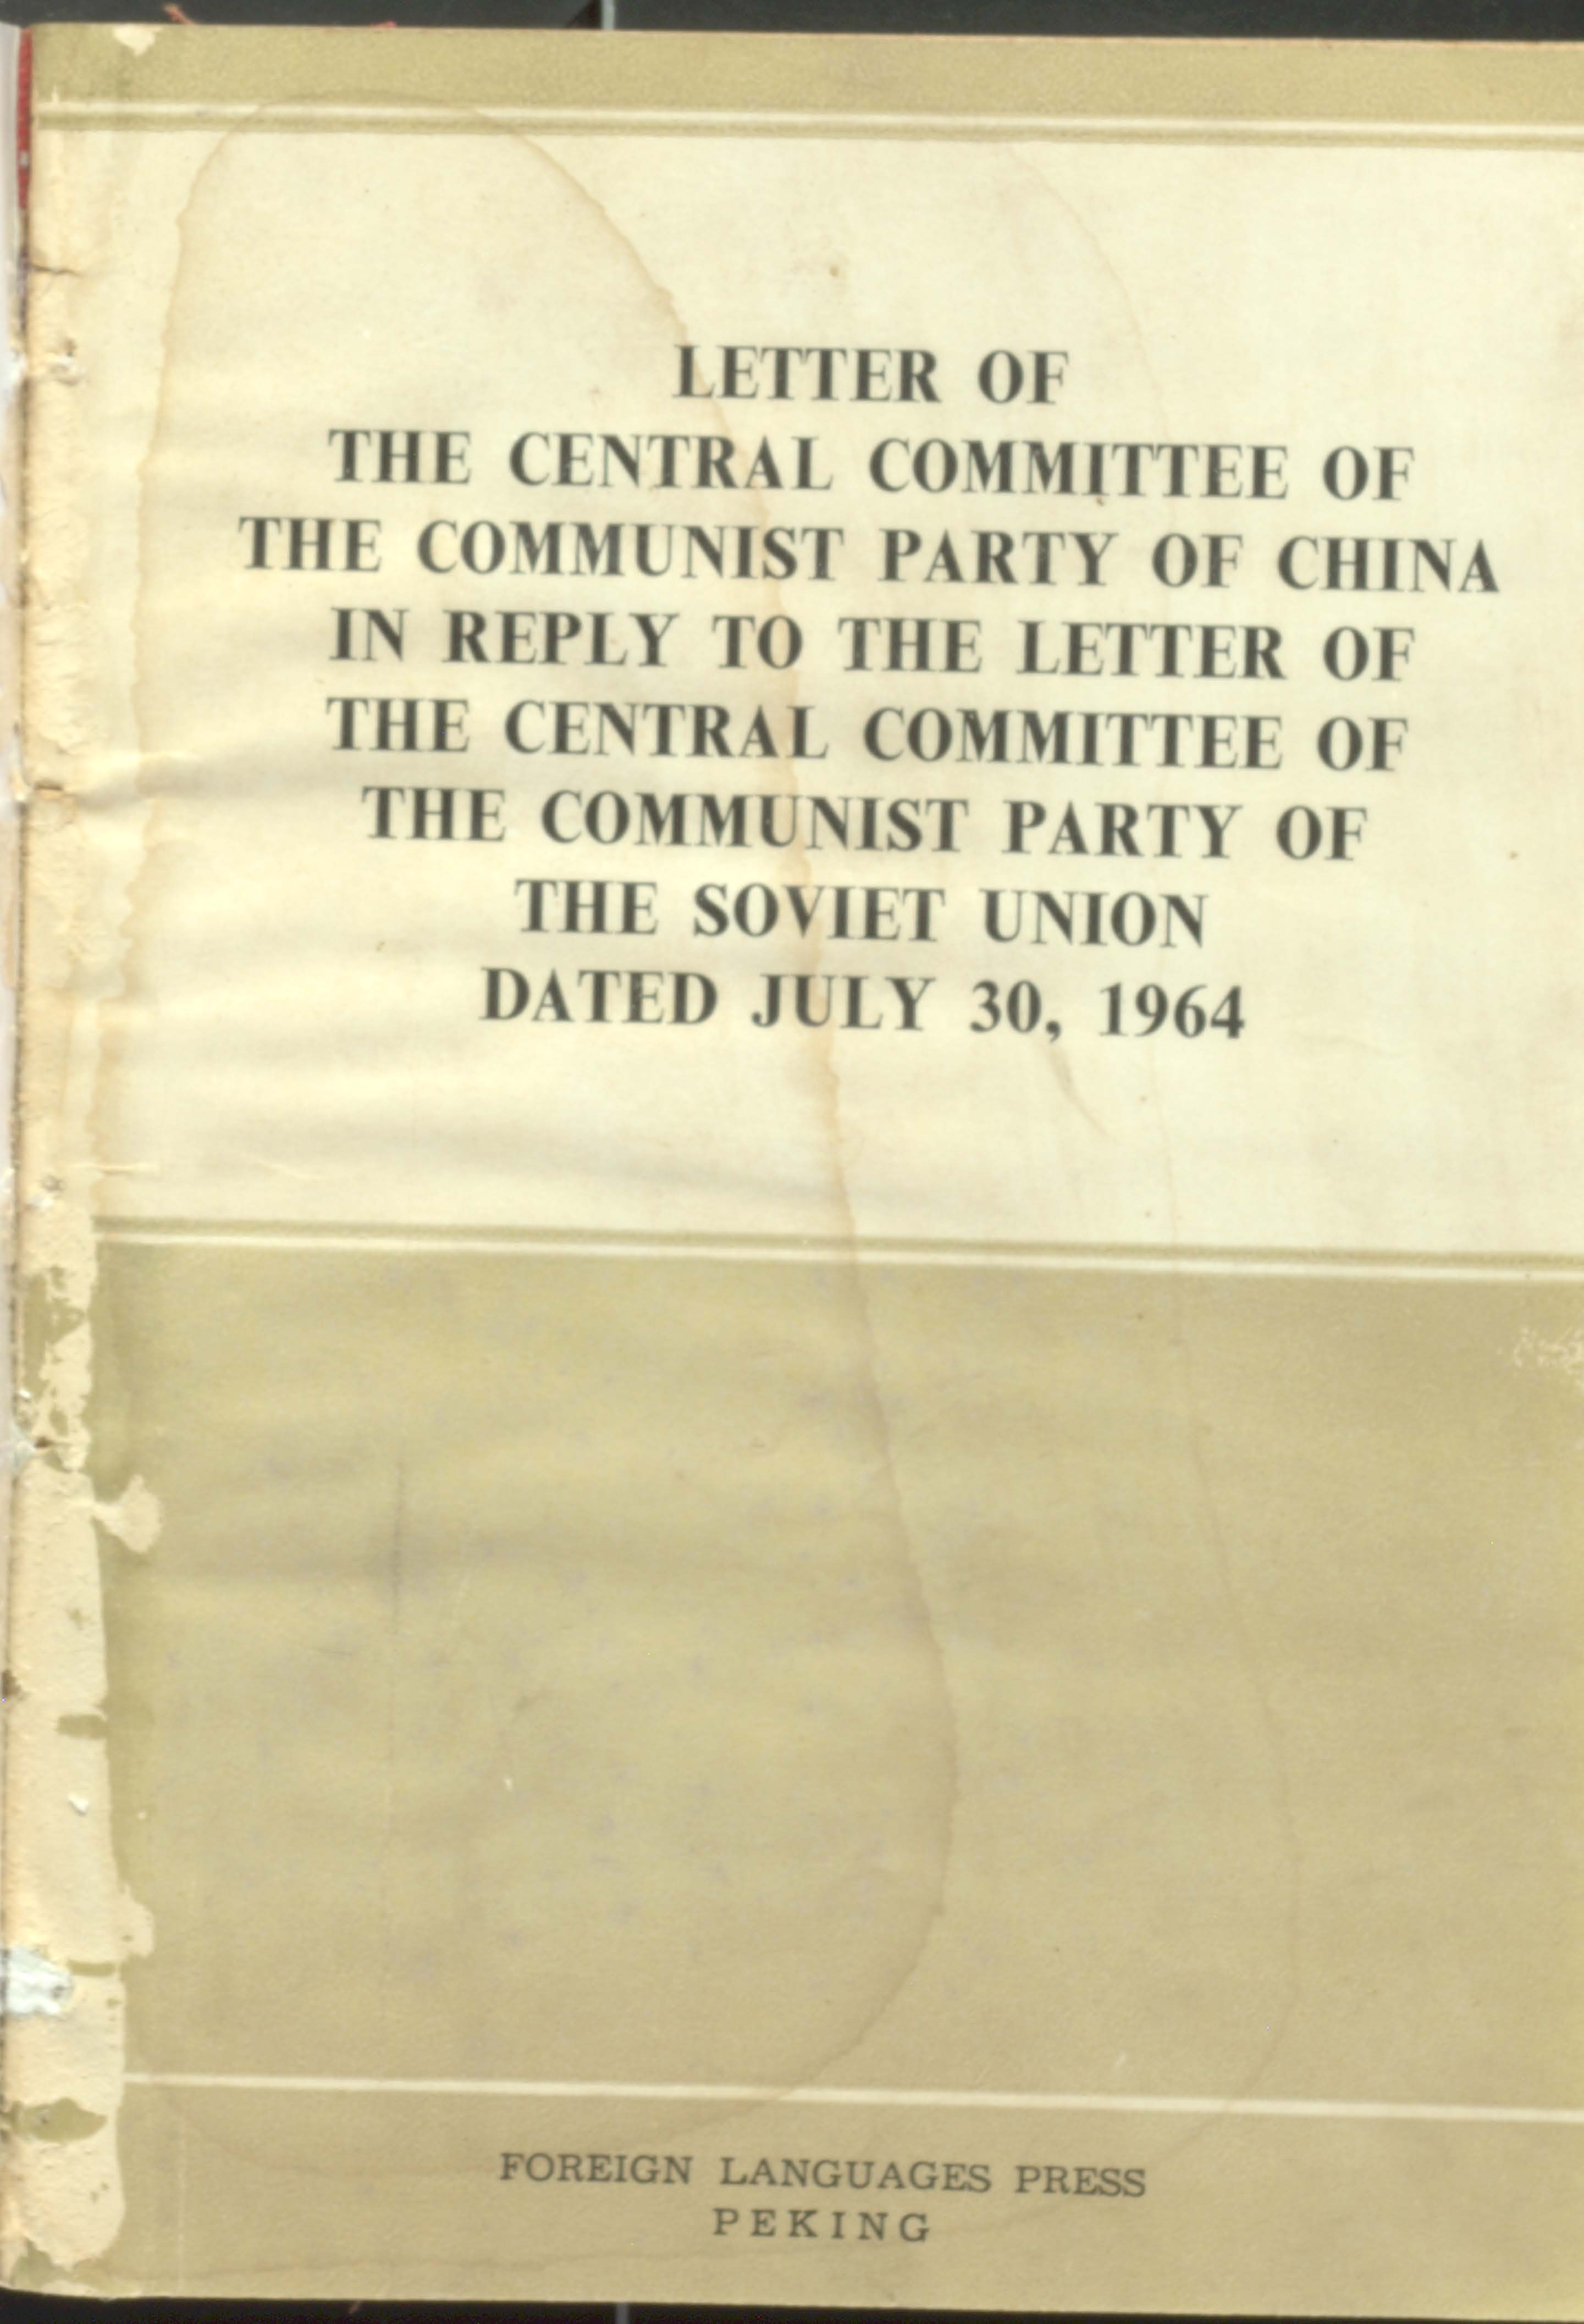 Letter of the central committee of the communist party of china the soviet union july 30,1964